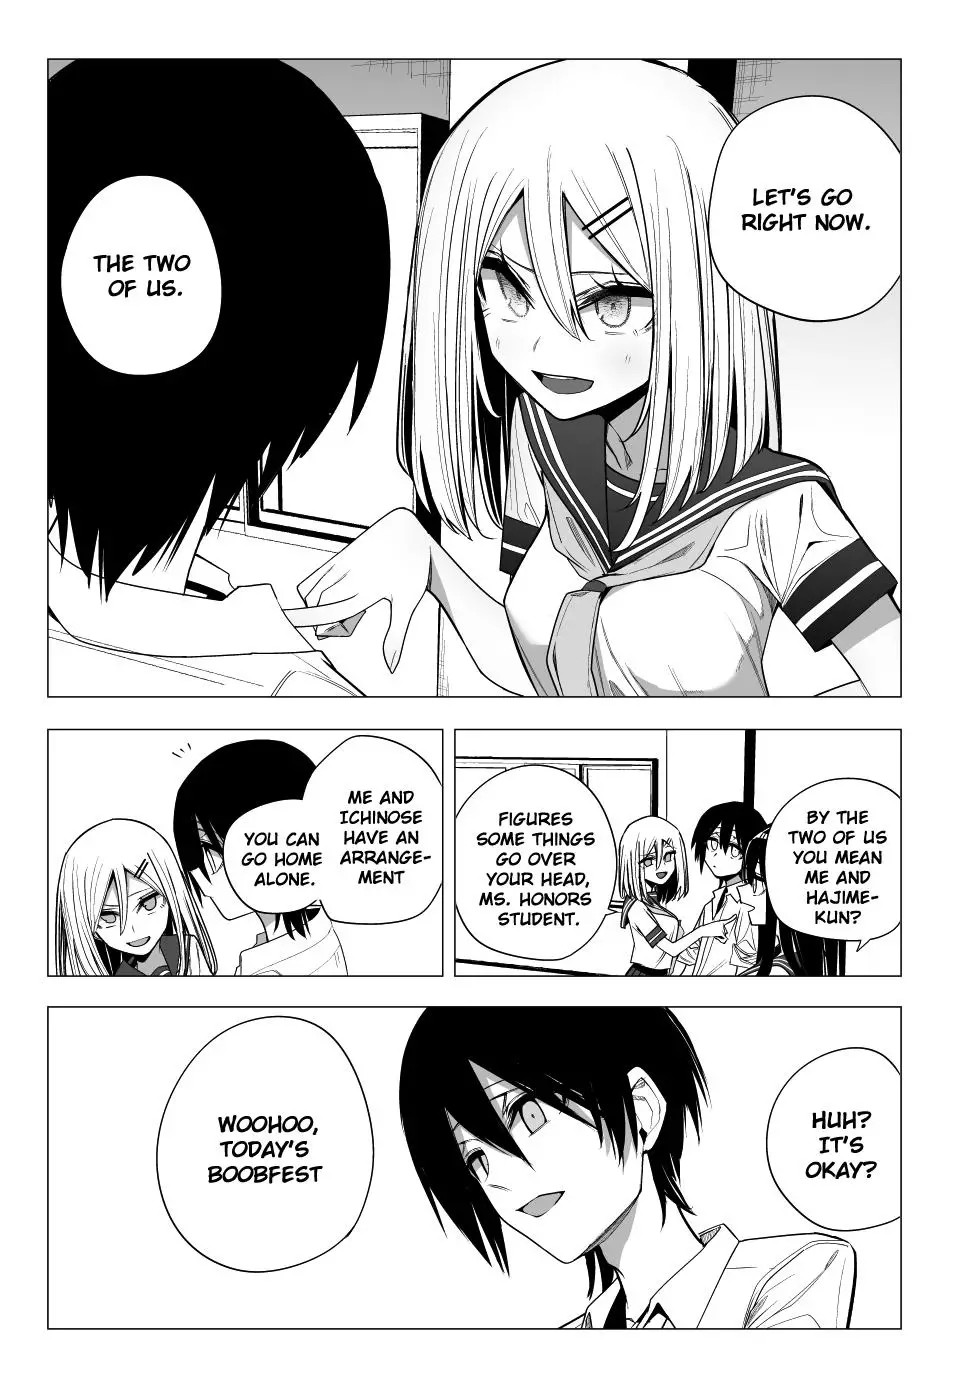 Mitsuishi-San Is Being Weird This Year - 30 page 12-7e7ef73c